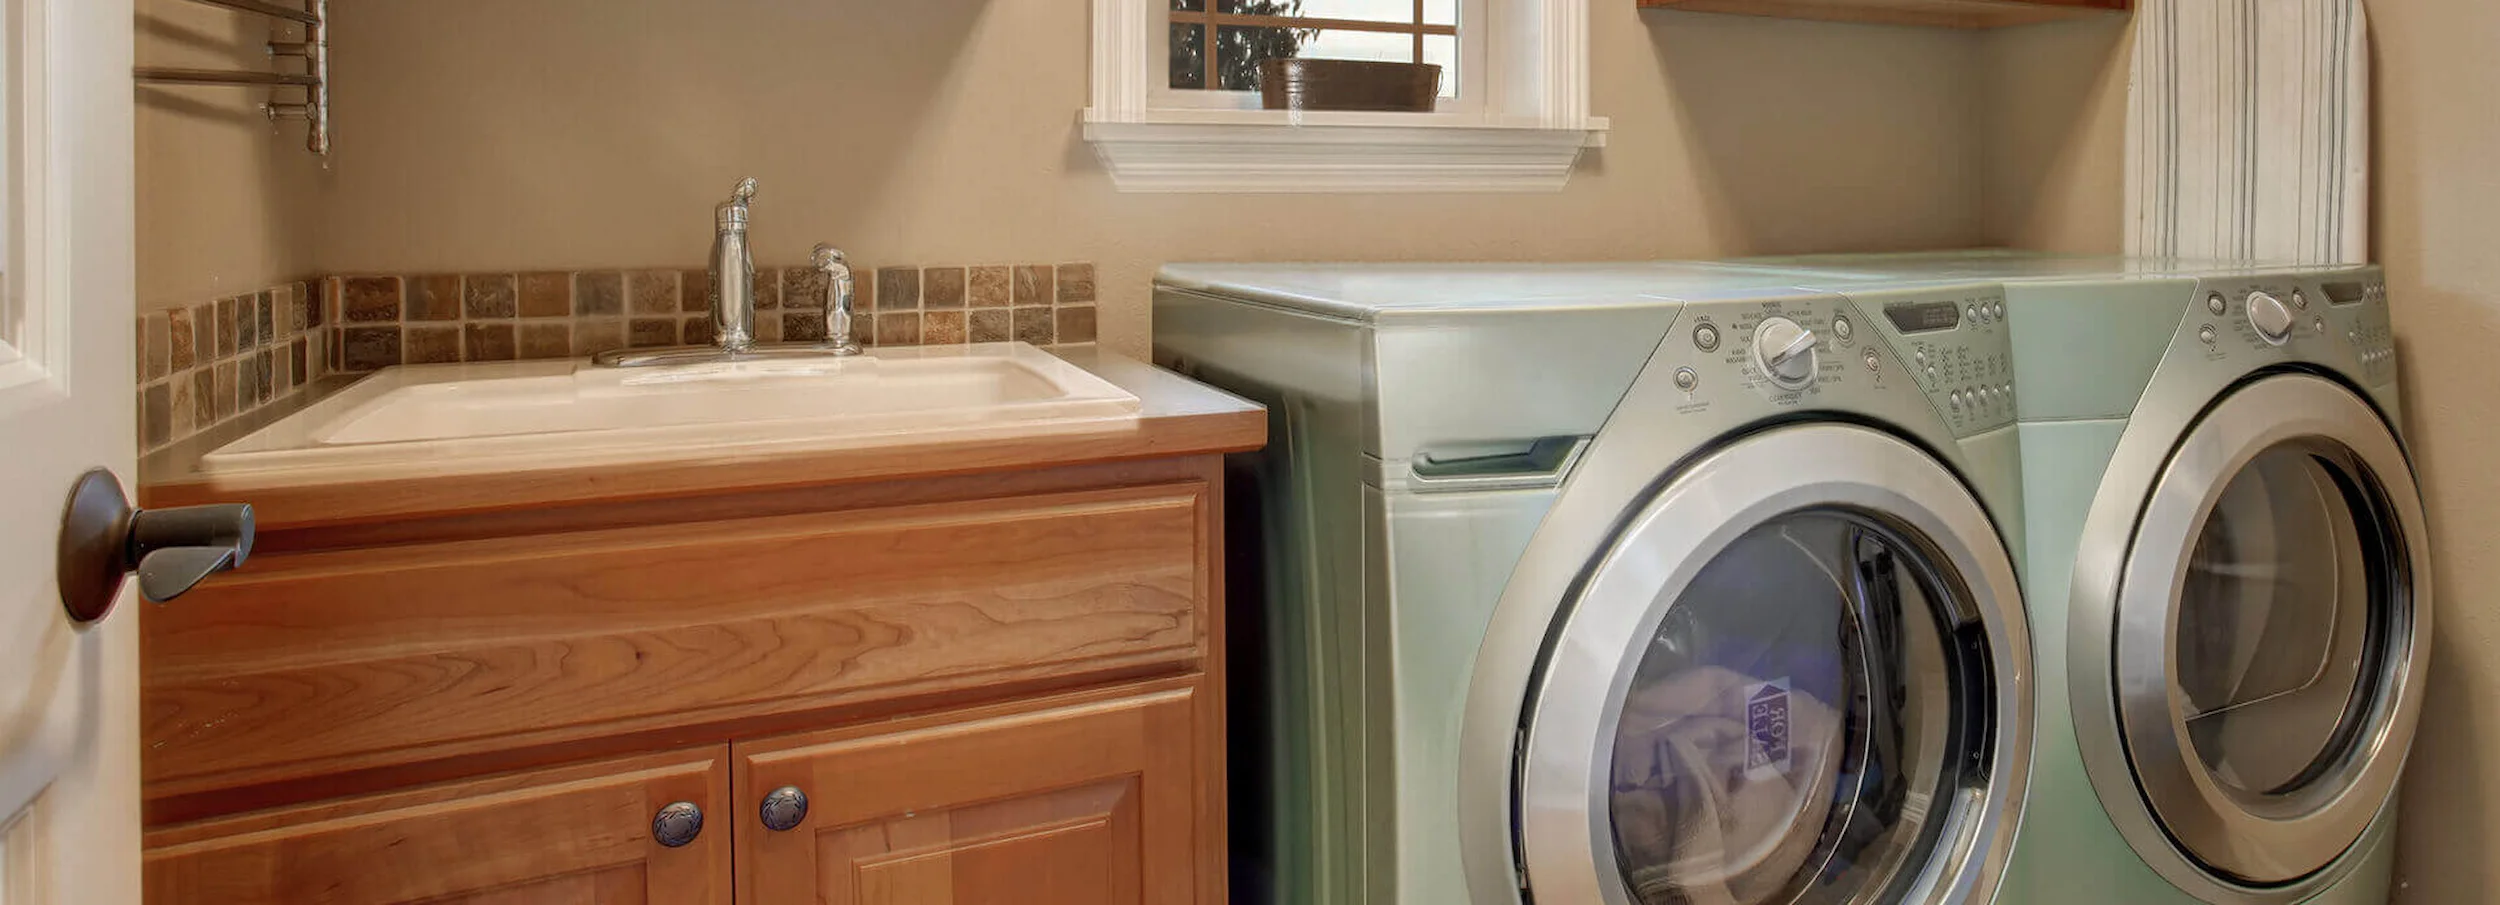 Gray washing machine and dryer beside sink in tidy home laundry room.